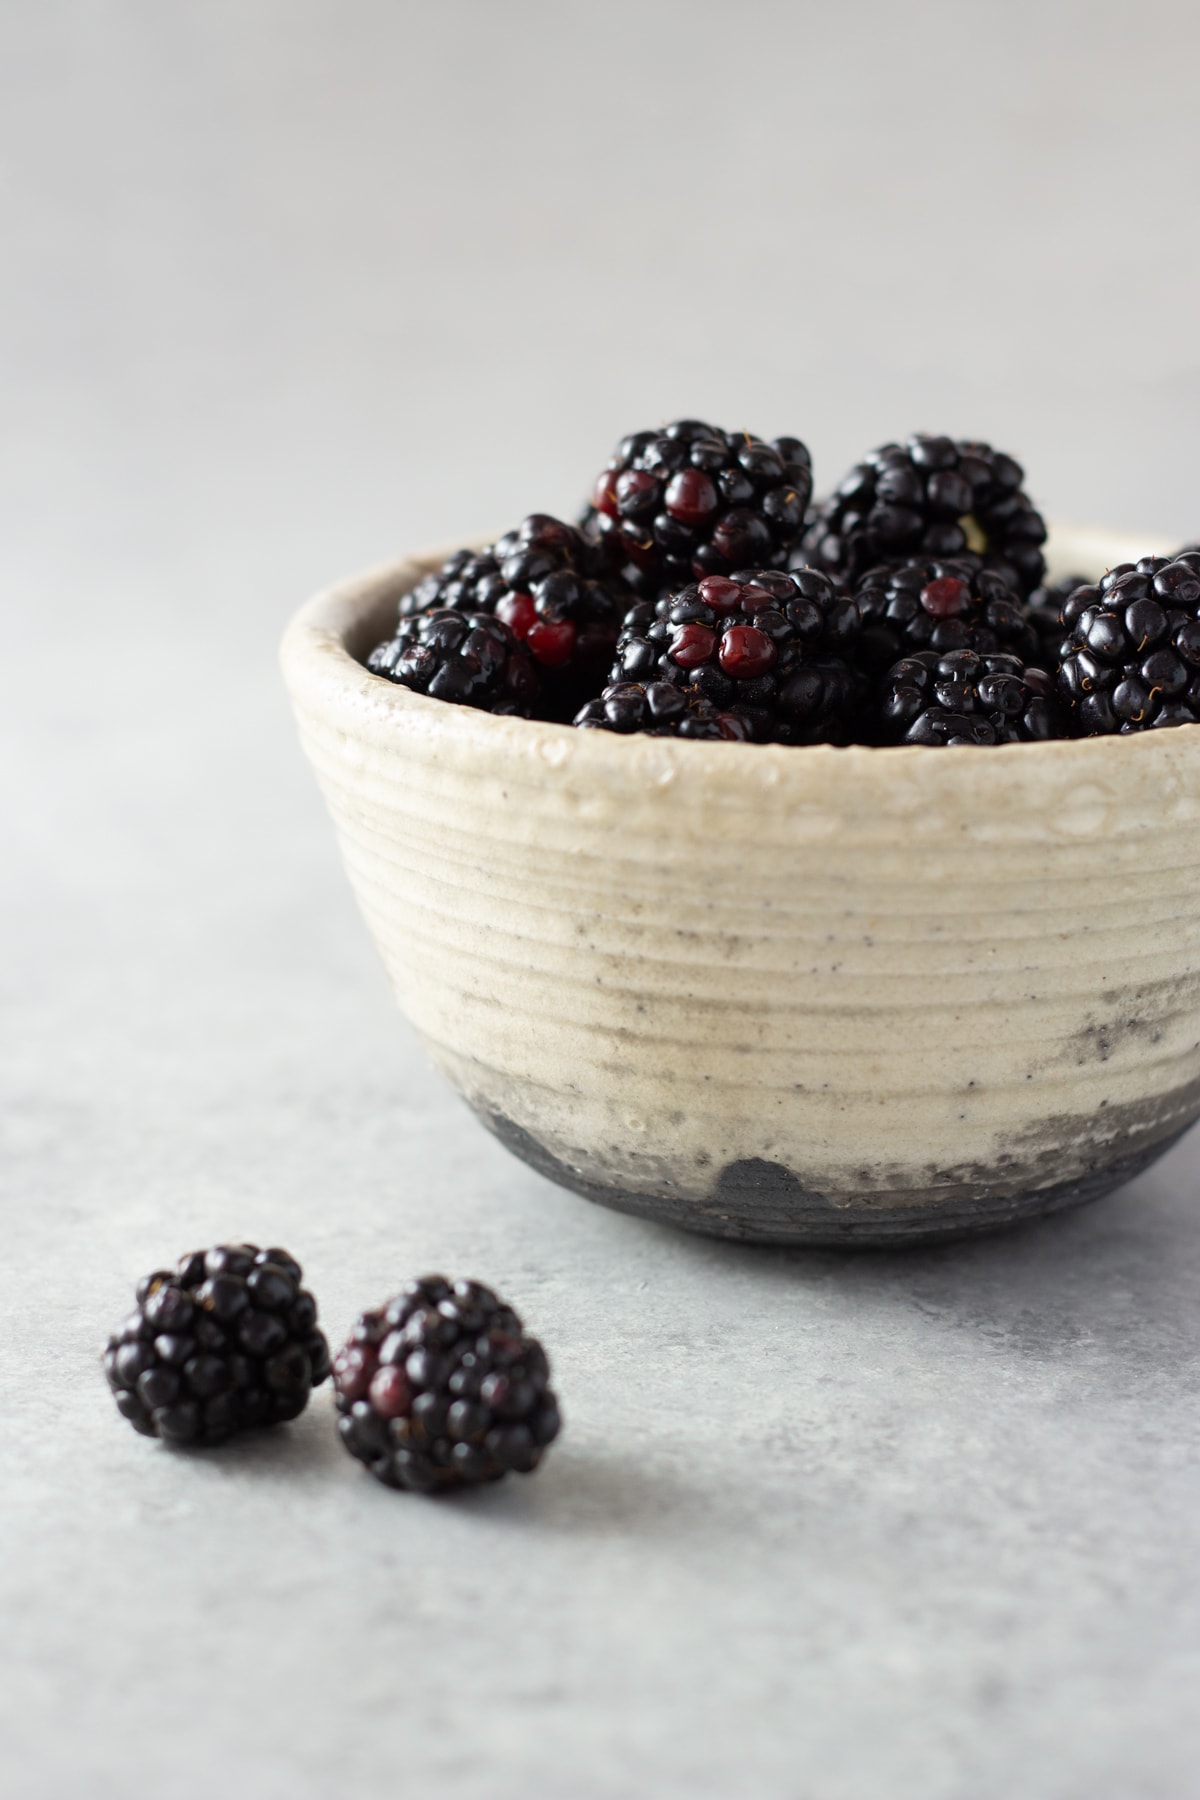 Straight on shot of a rustic bowl filled with fresh blackberries on a light grey surface.